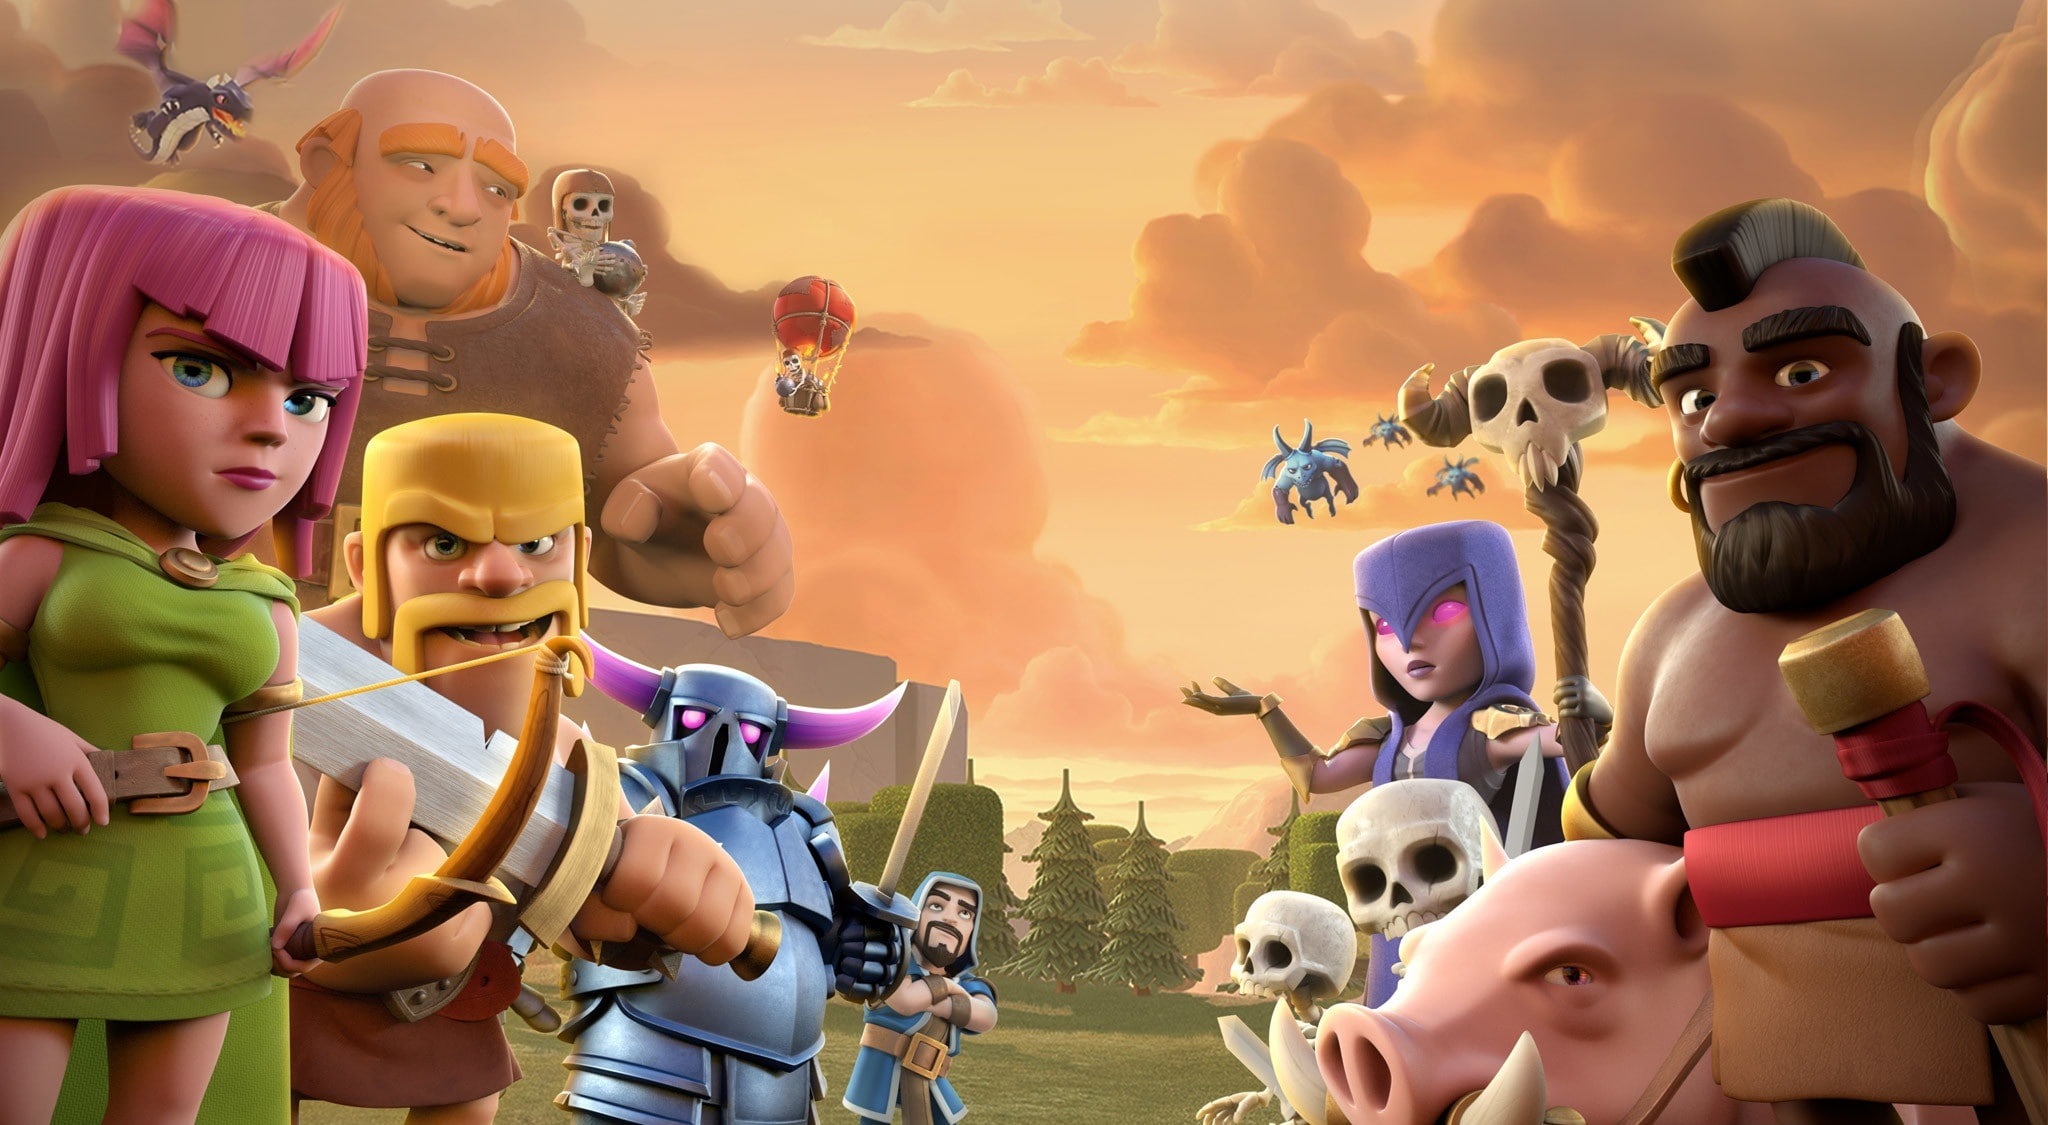 Clash Of Clans, Clash of Clans wallpaper, Games, Other Games